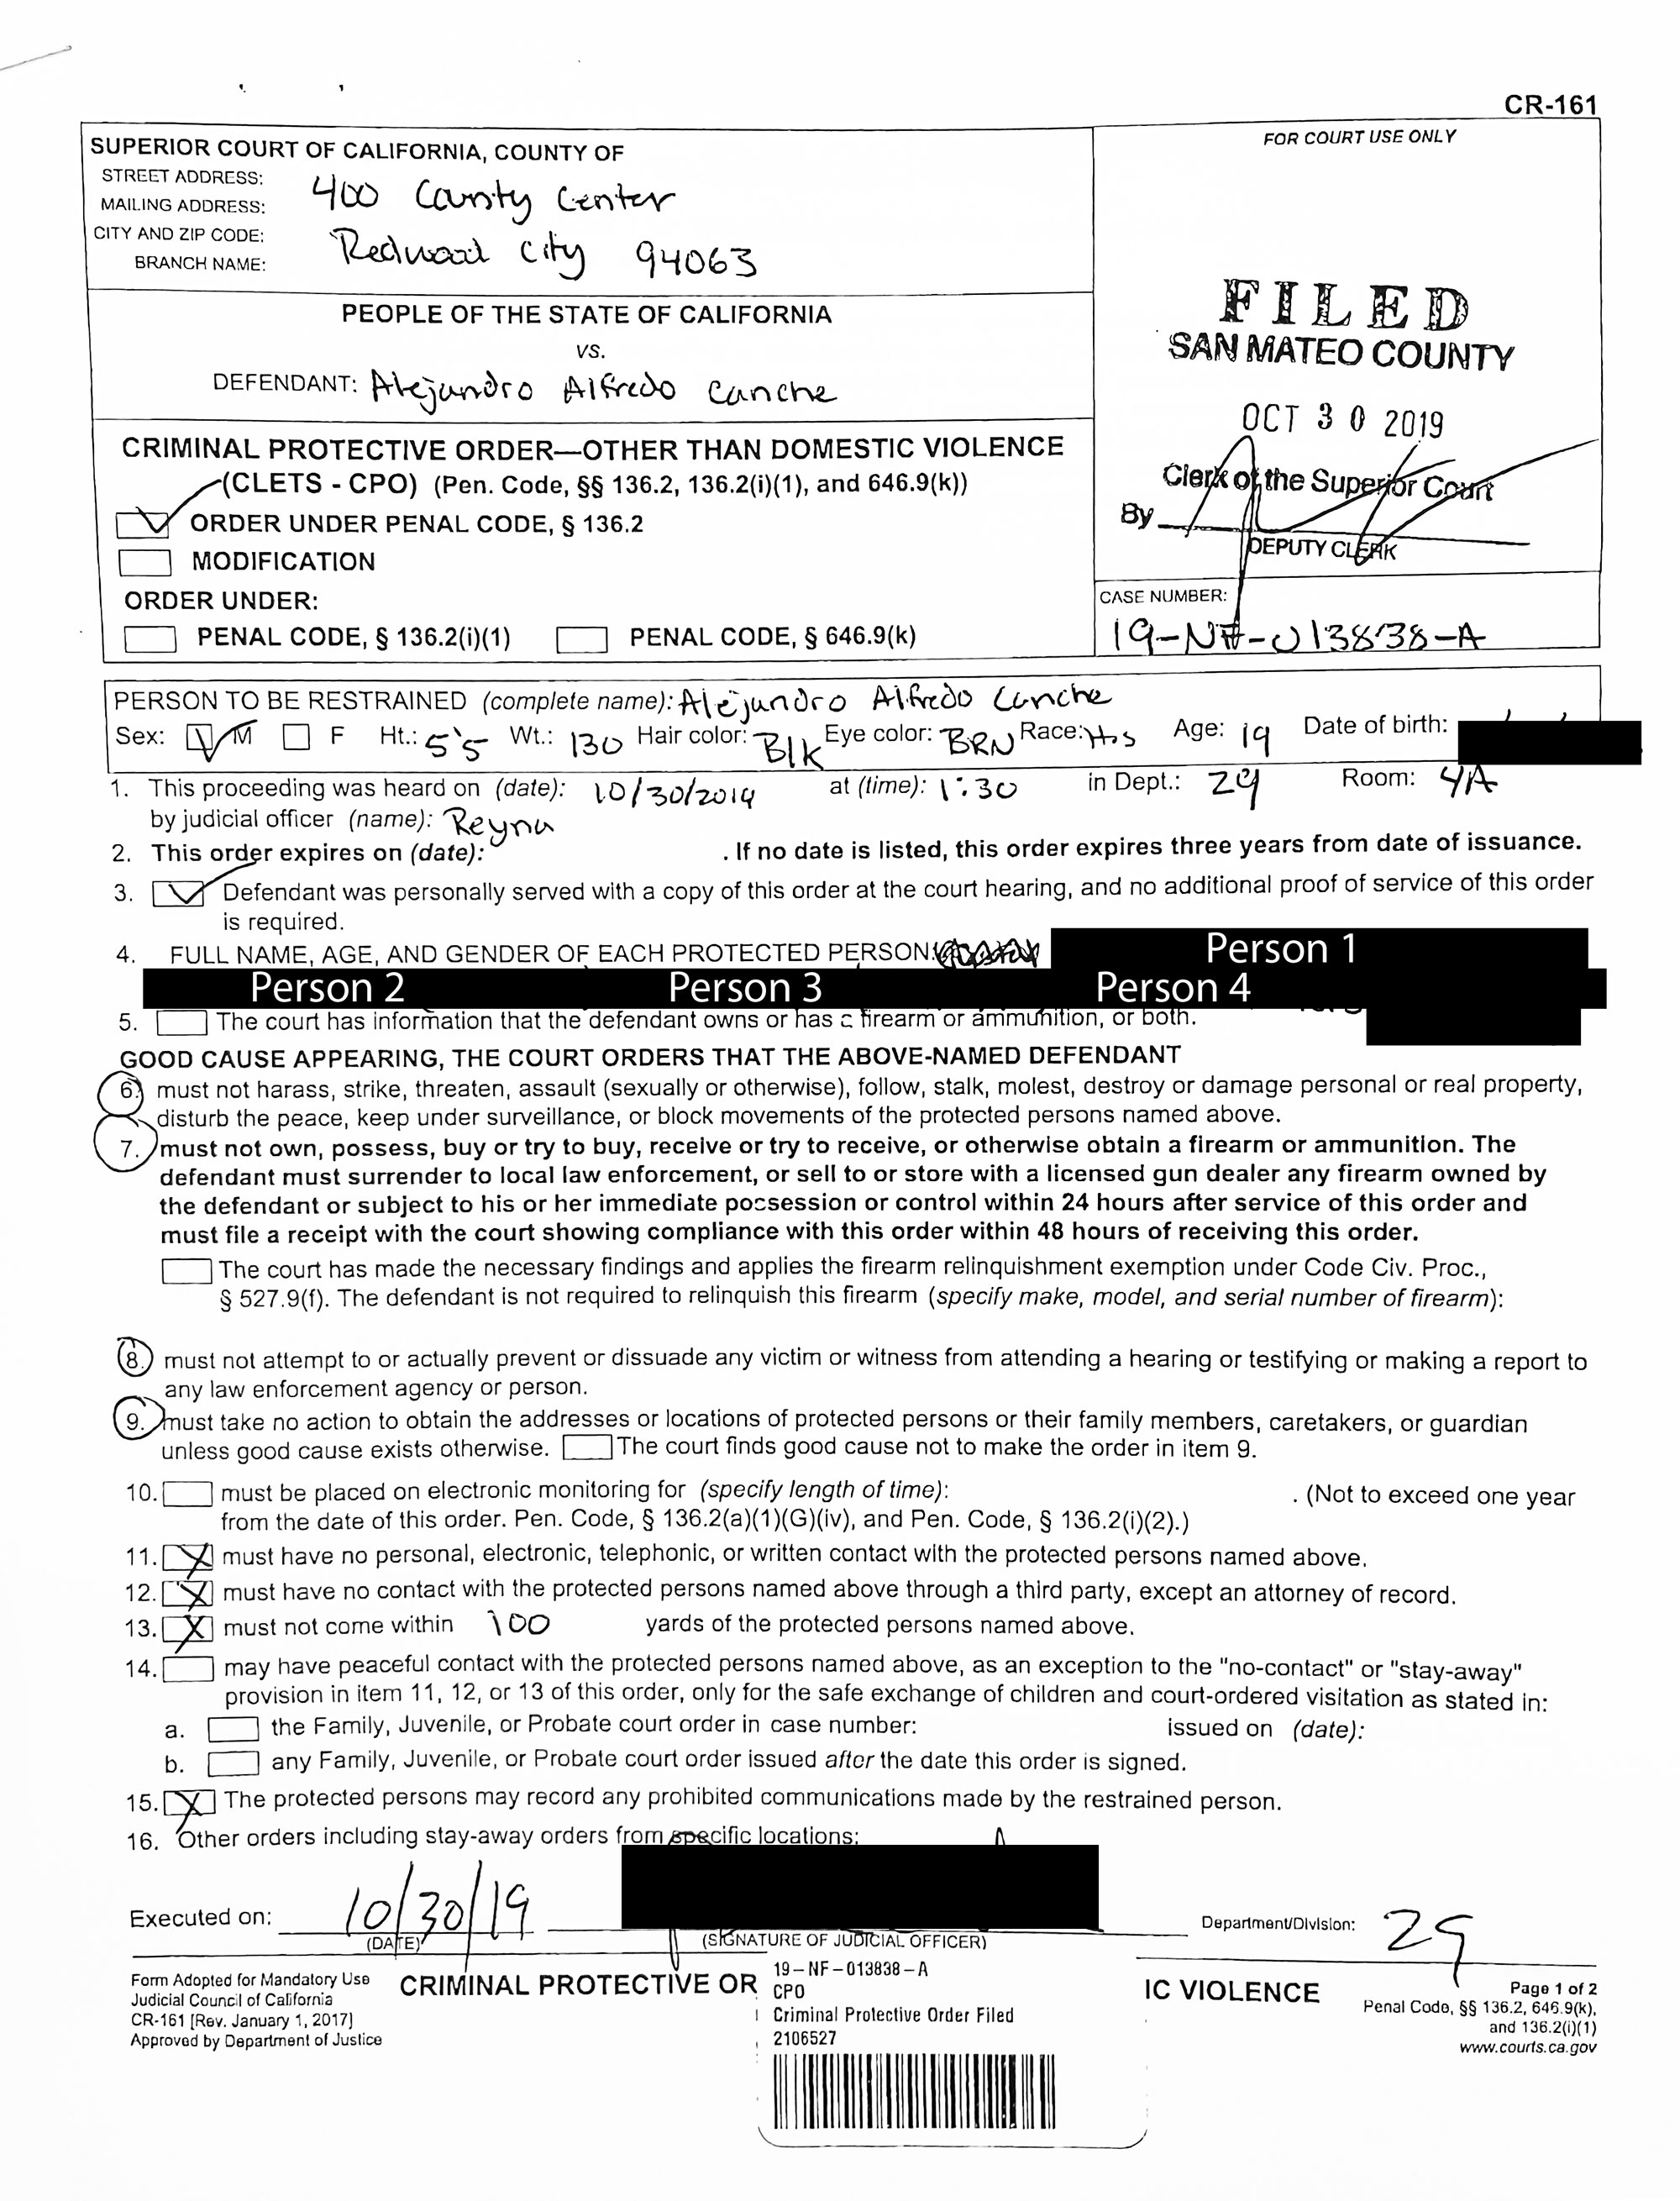 Restraining order issued against Alejandro Canche, Alex Canche, in attempted murders case in San Mateo, California, in October 2019